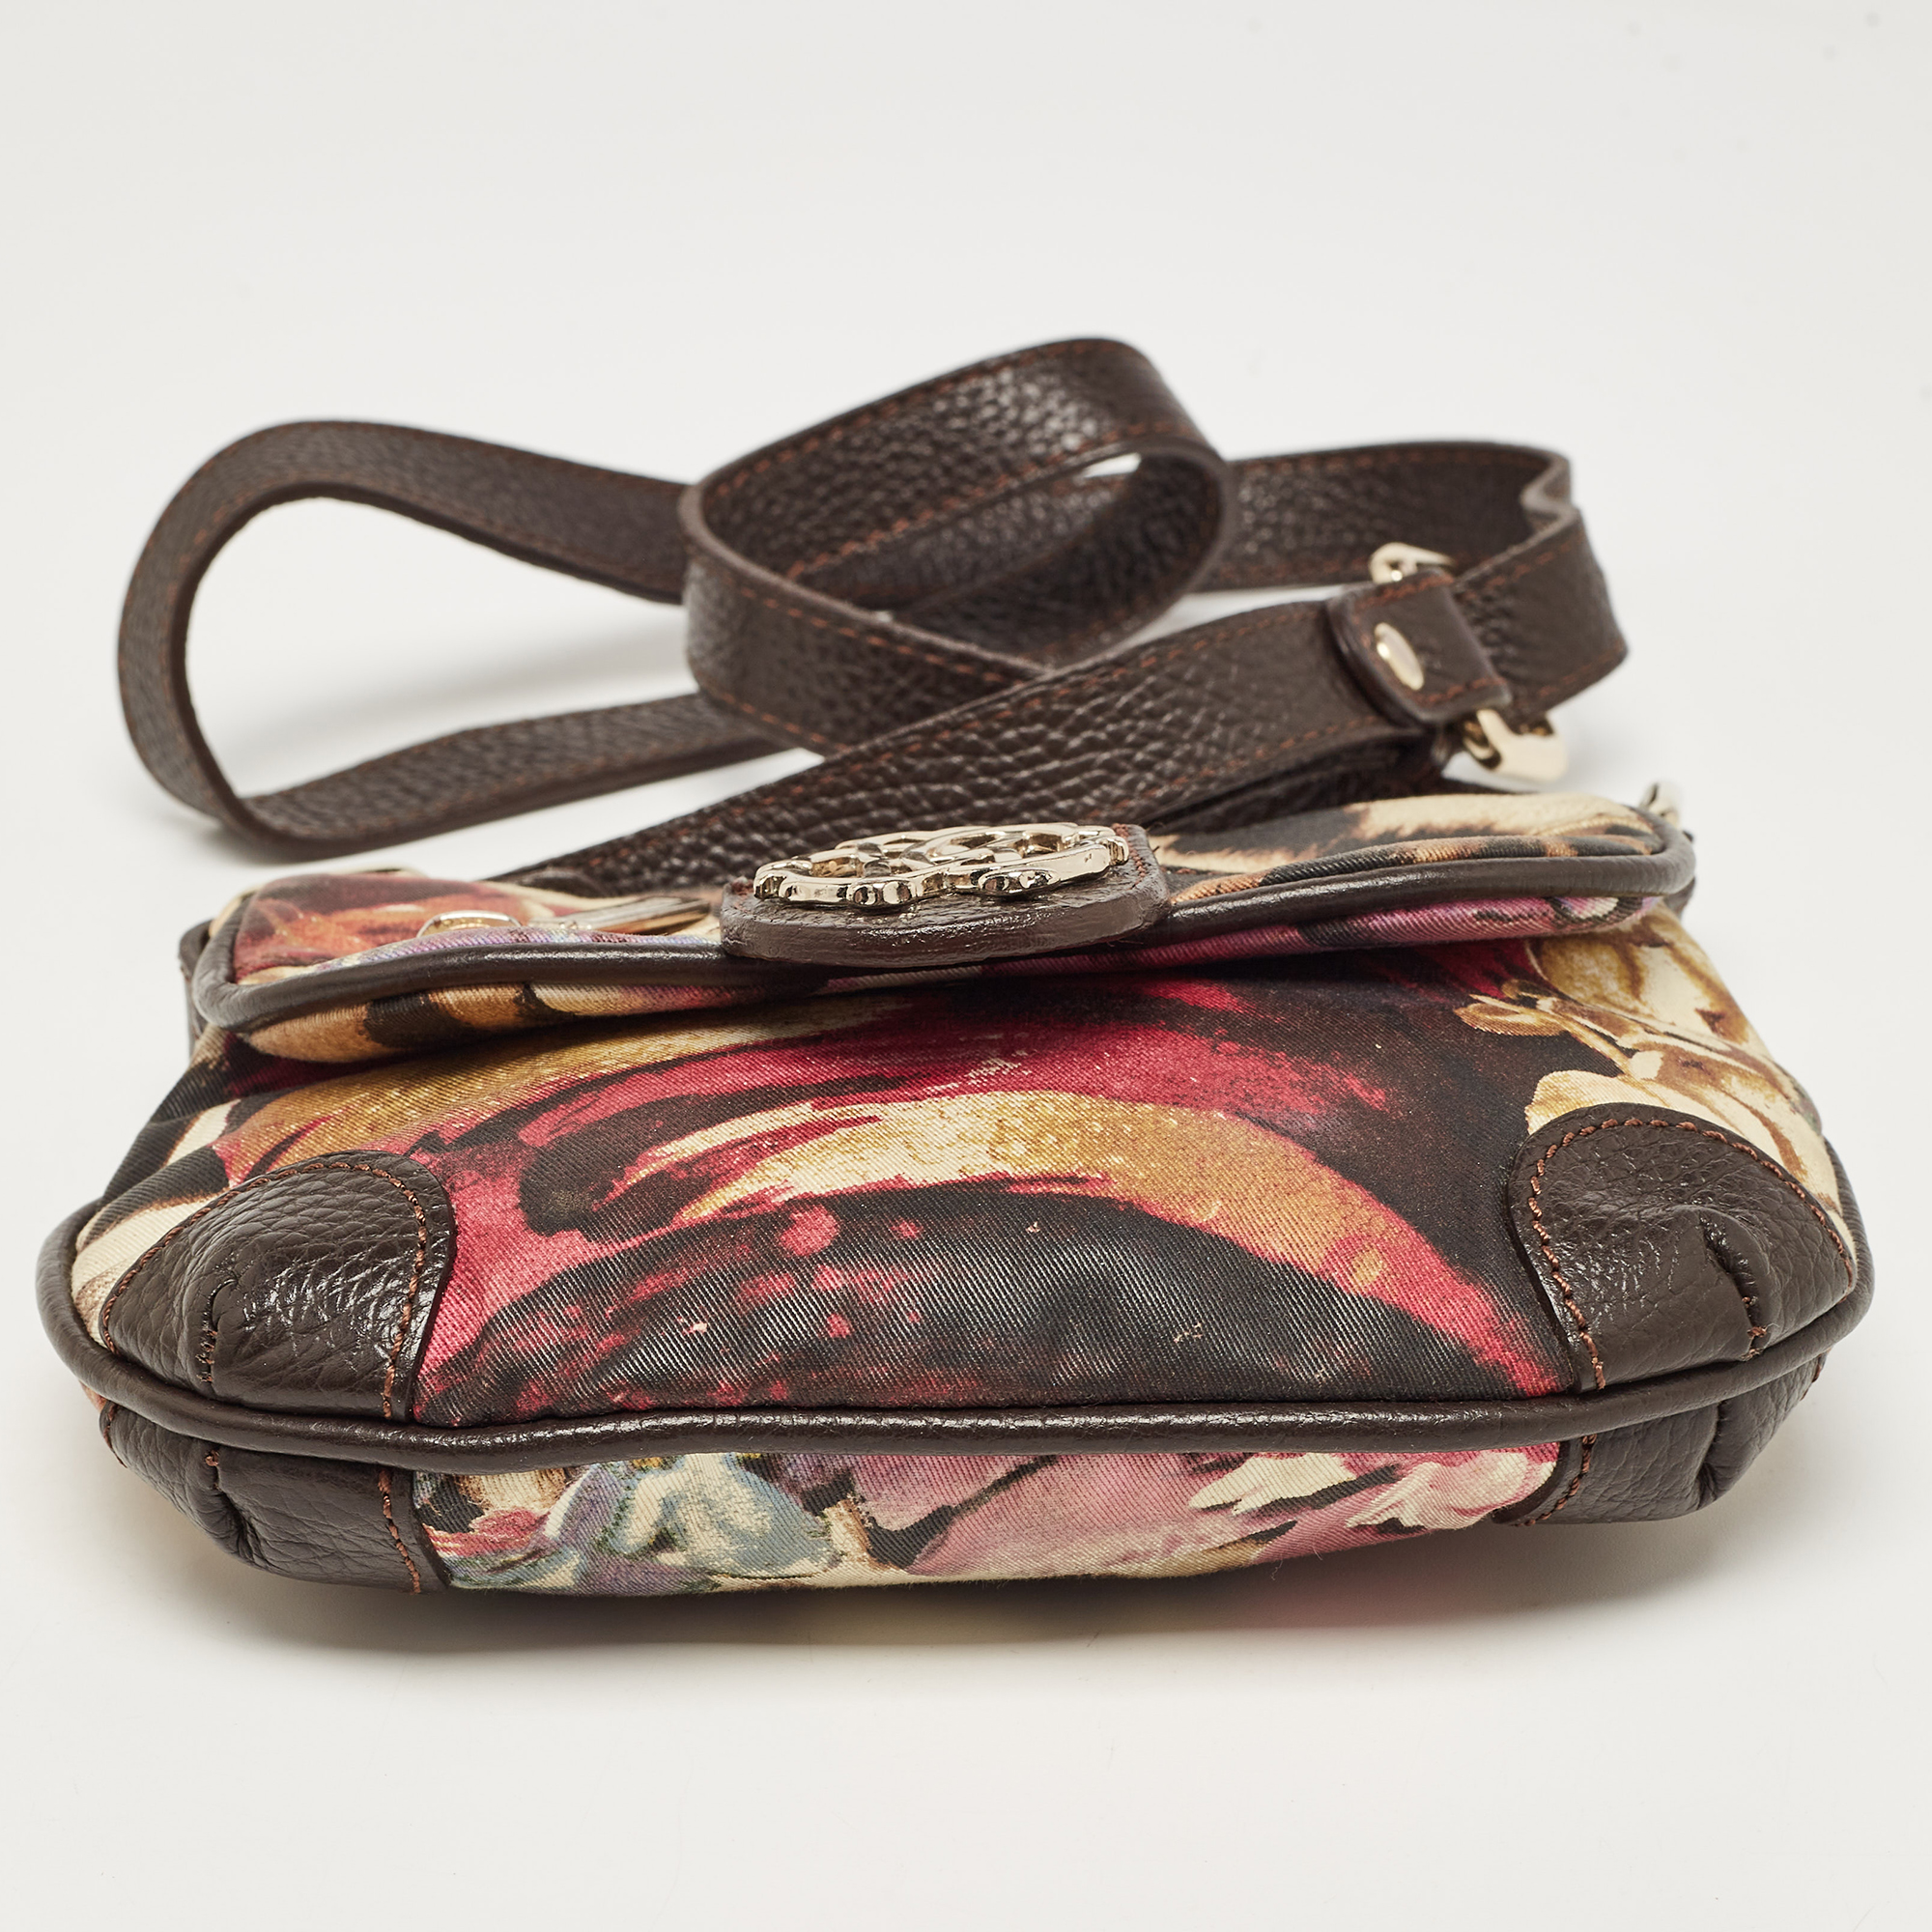 Roberto Cavalli Multicolor Printed Fabric And Leather Shoulder Bag